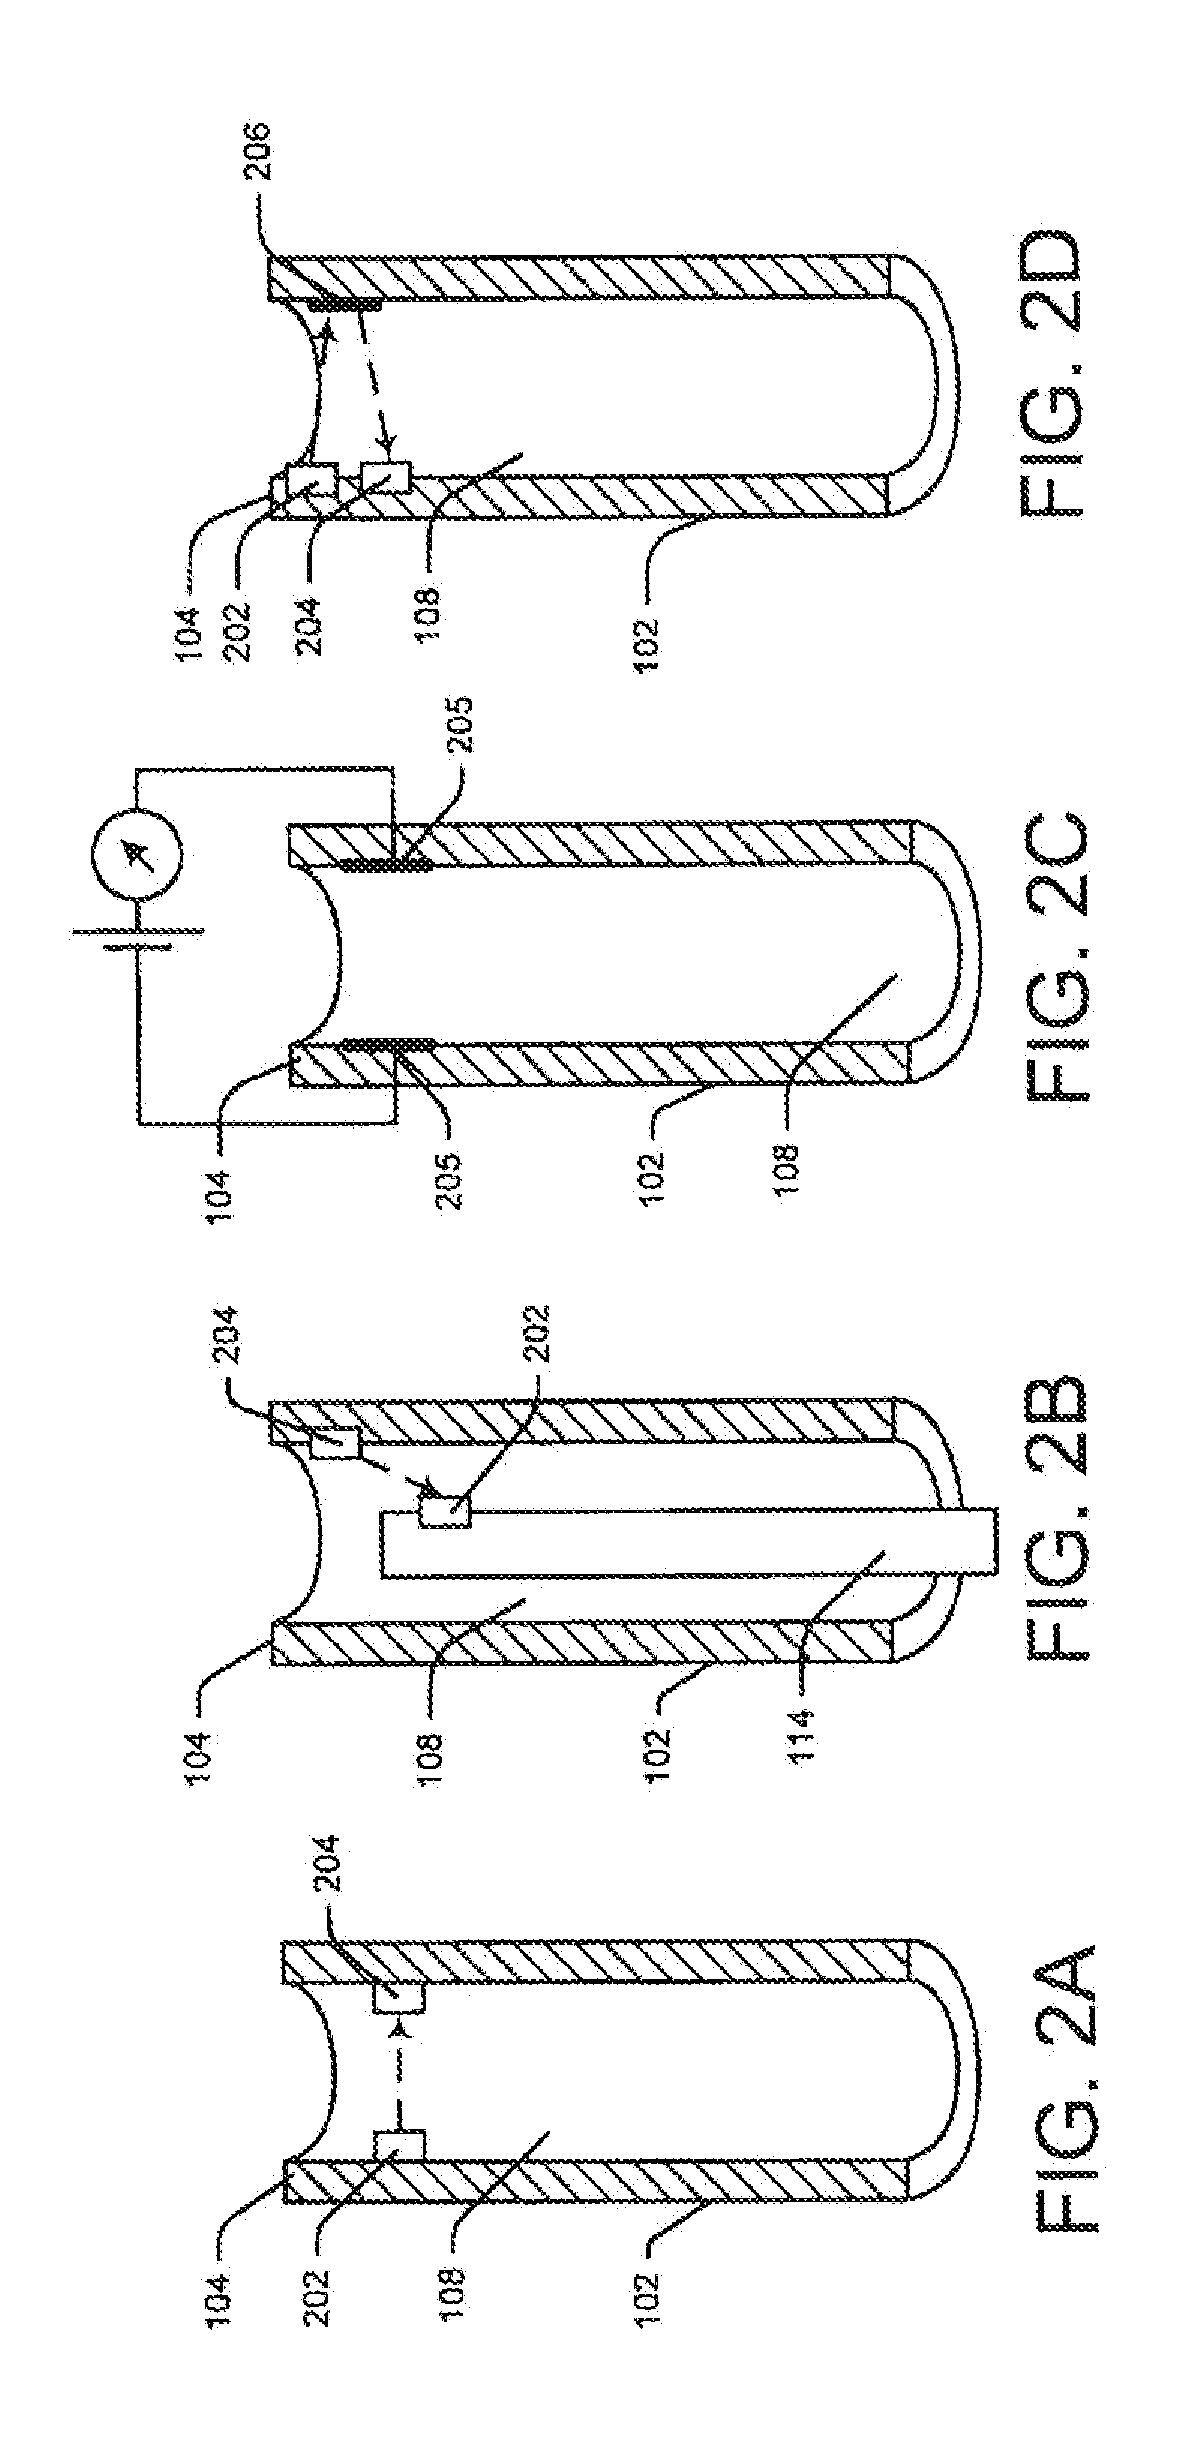 Systems and methods for preventing laser fiber misfiring within endoscopic access devices